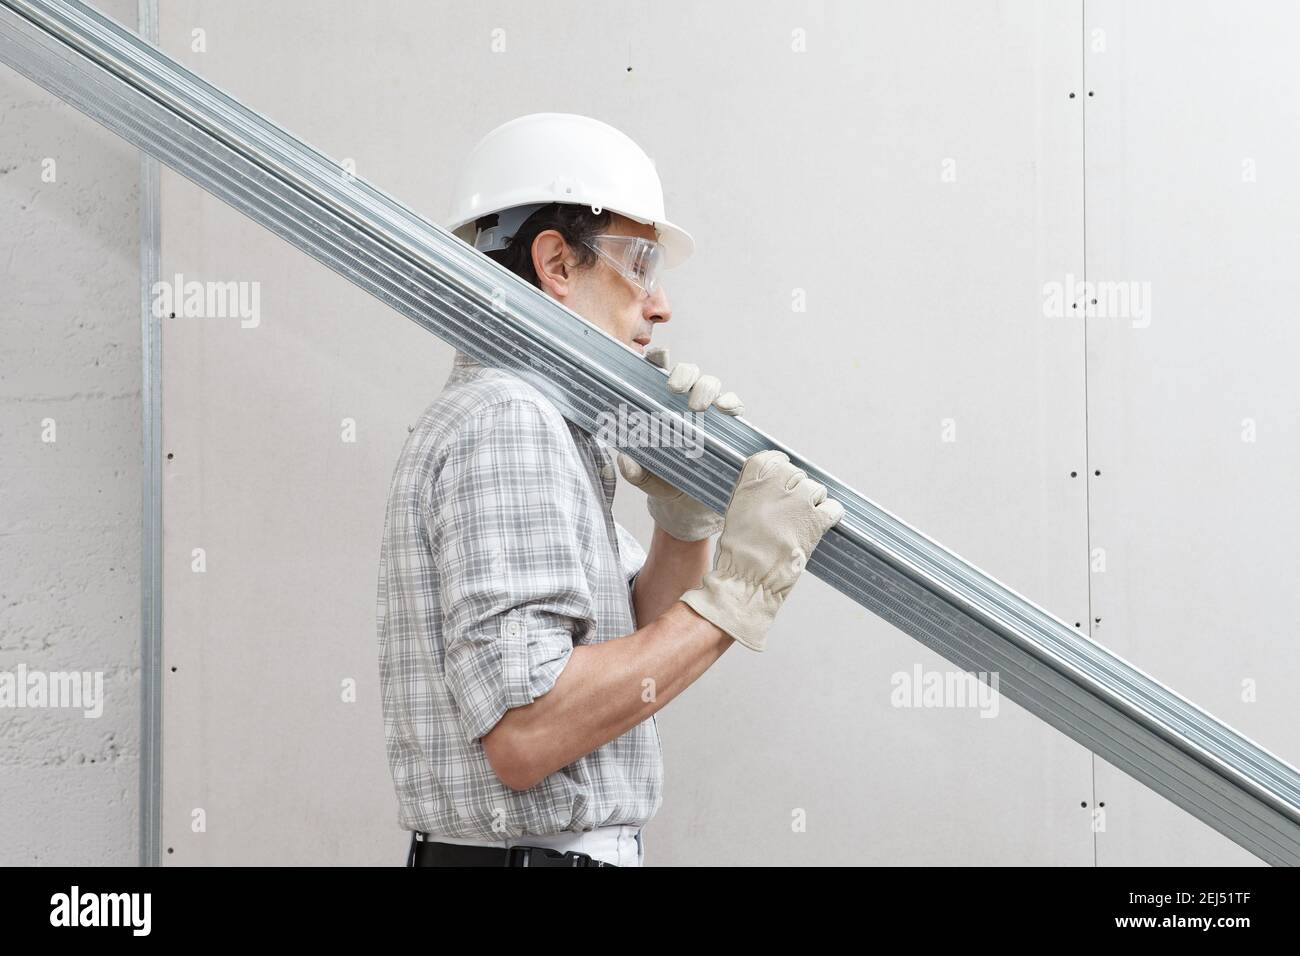 man worker with drywall metal profiles for installing plasterboard sheet to wall. Wearing white hardhat, work gloves and safety glasses. Isolated on w Stock Photo